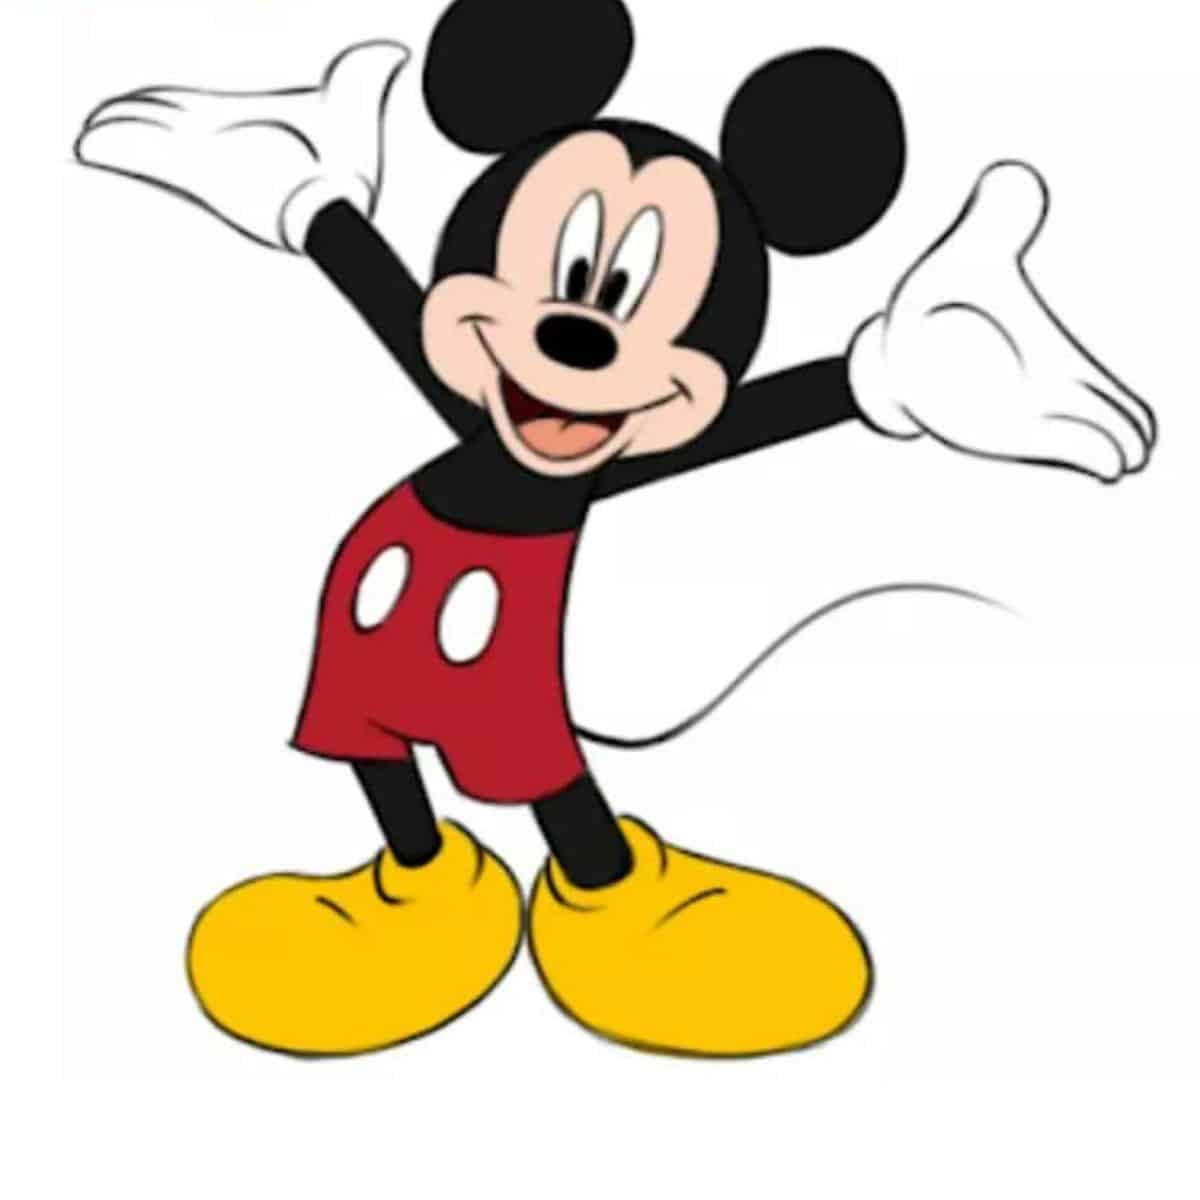 25 Easy Mickey Mouse Drawing Ideas for Kids (+Tutorials)